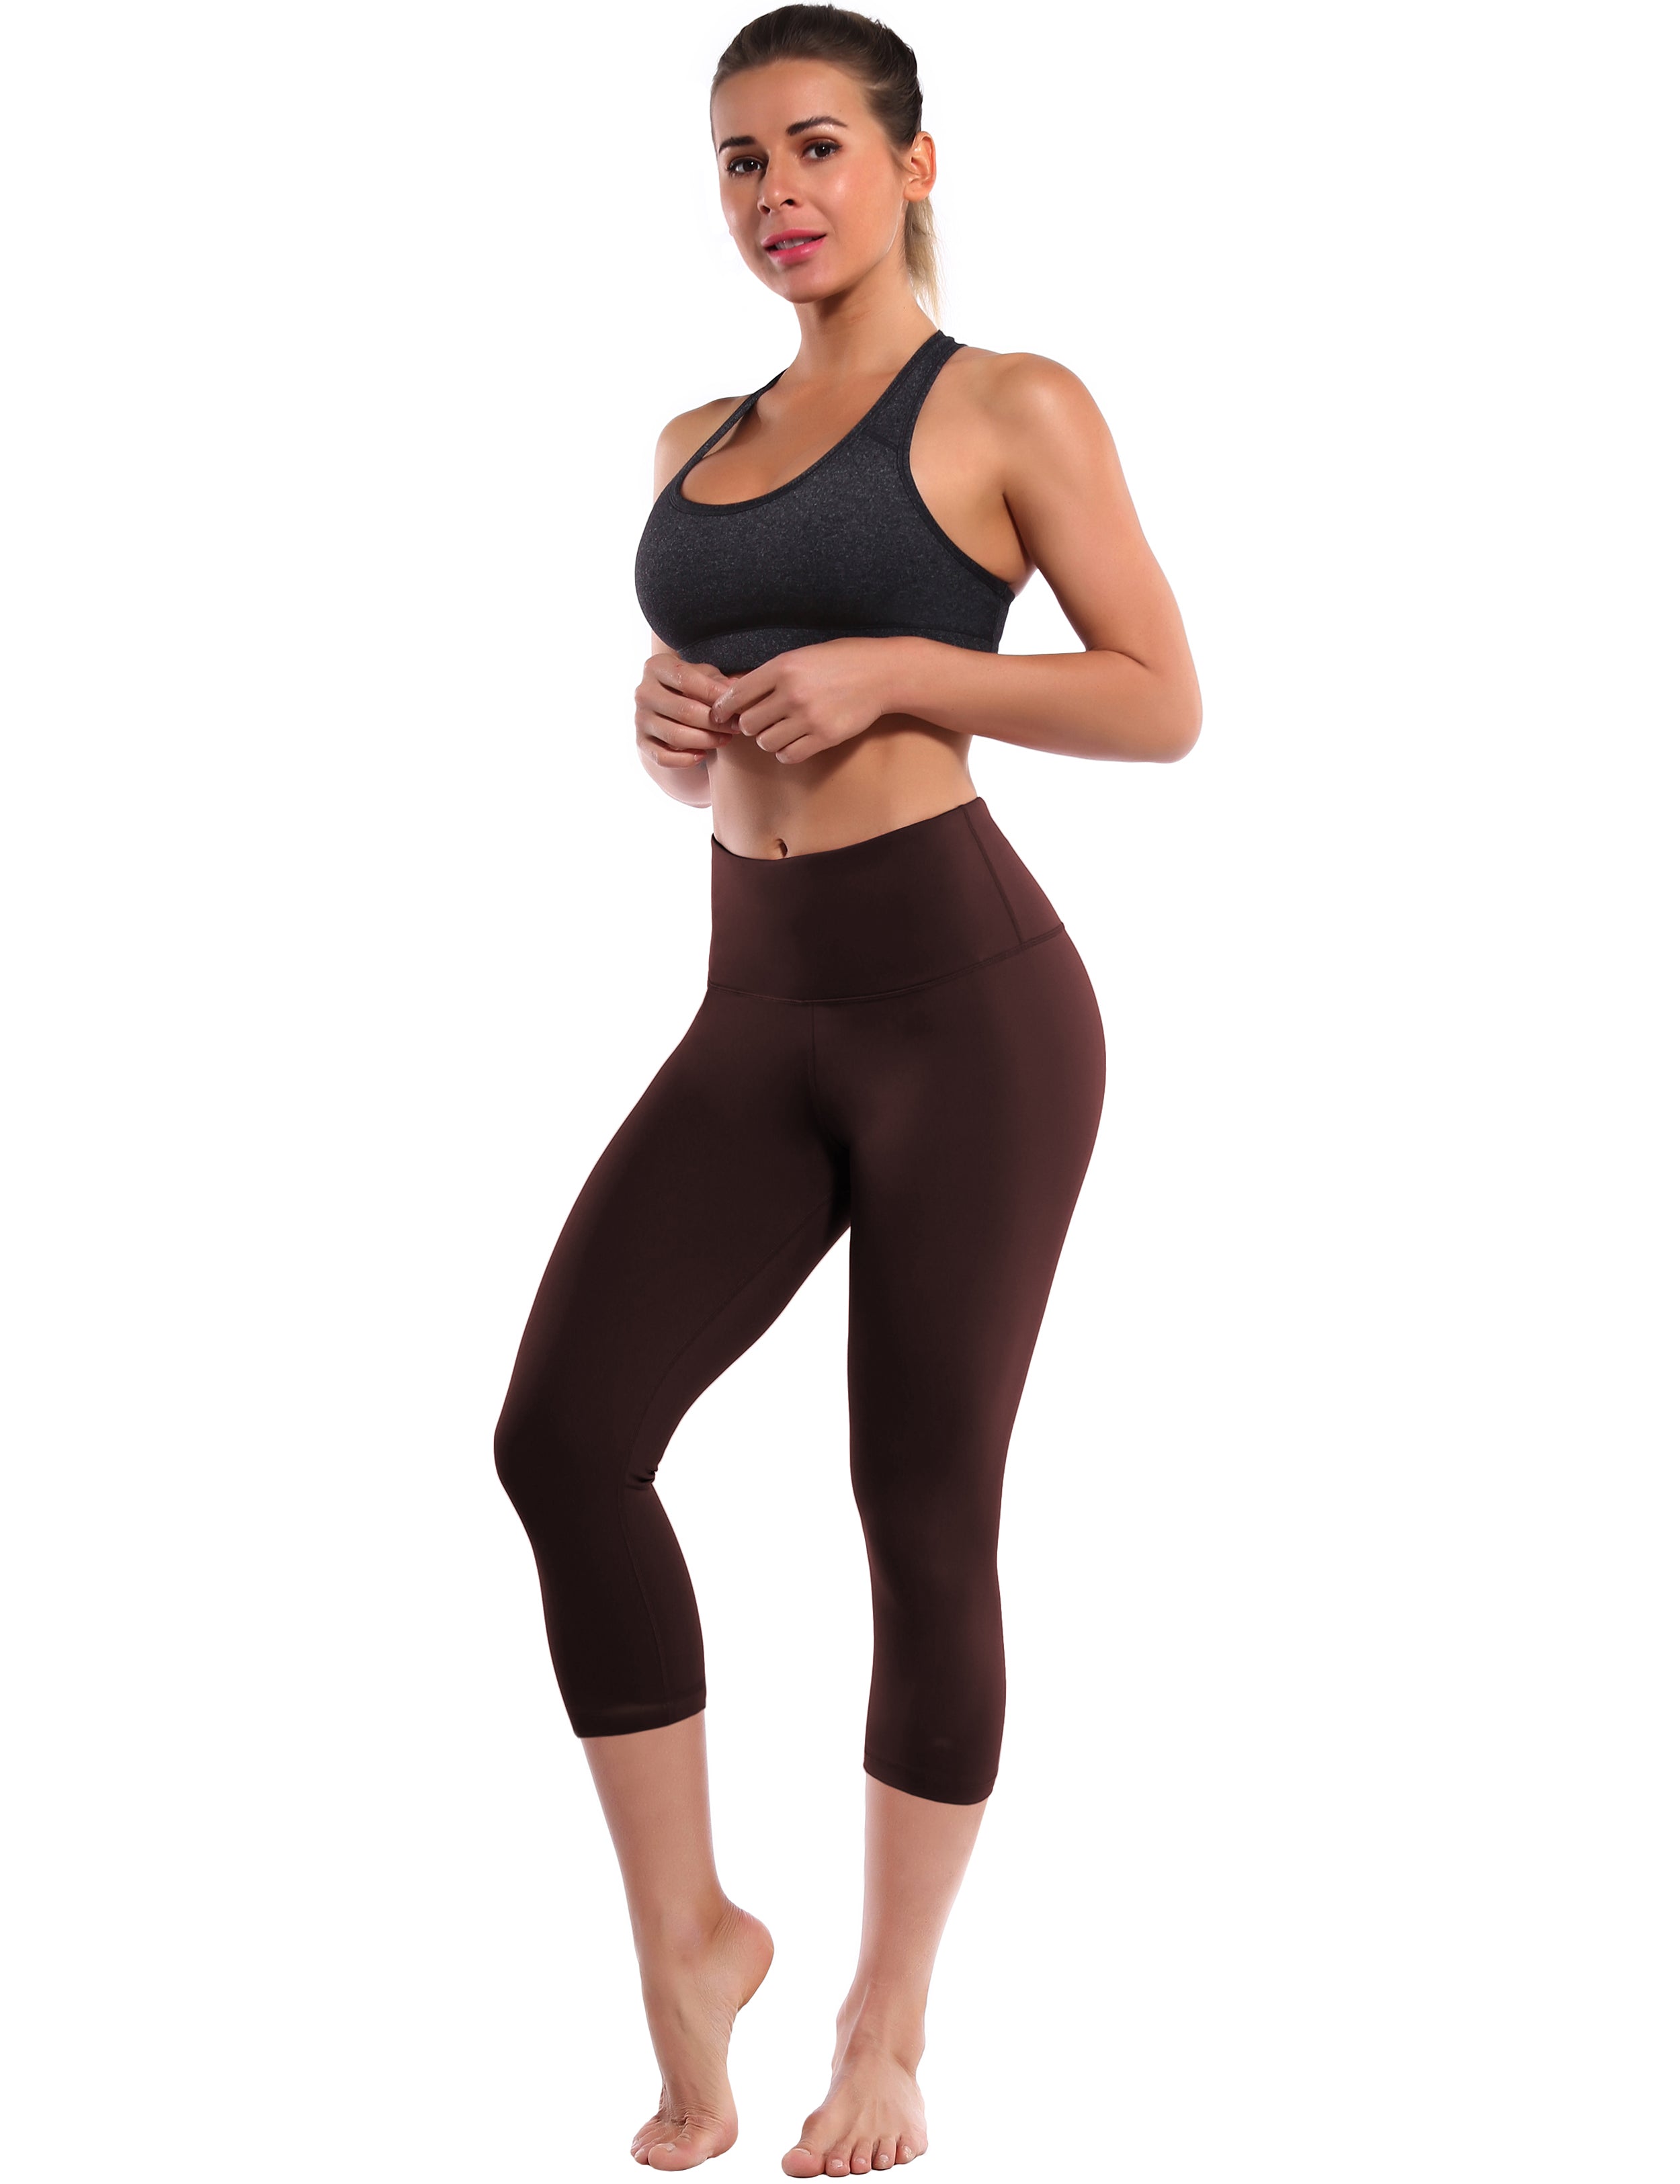 19" High Waist Crop Tight Capris mahoganymaroon 75%Nylon/25%Spandex Fabric doesn't attract lint easily 4-way stretch No see-through Moisture-wicking Tummy control Inner pocket